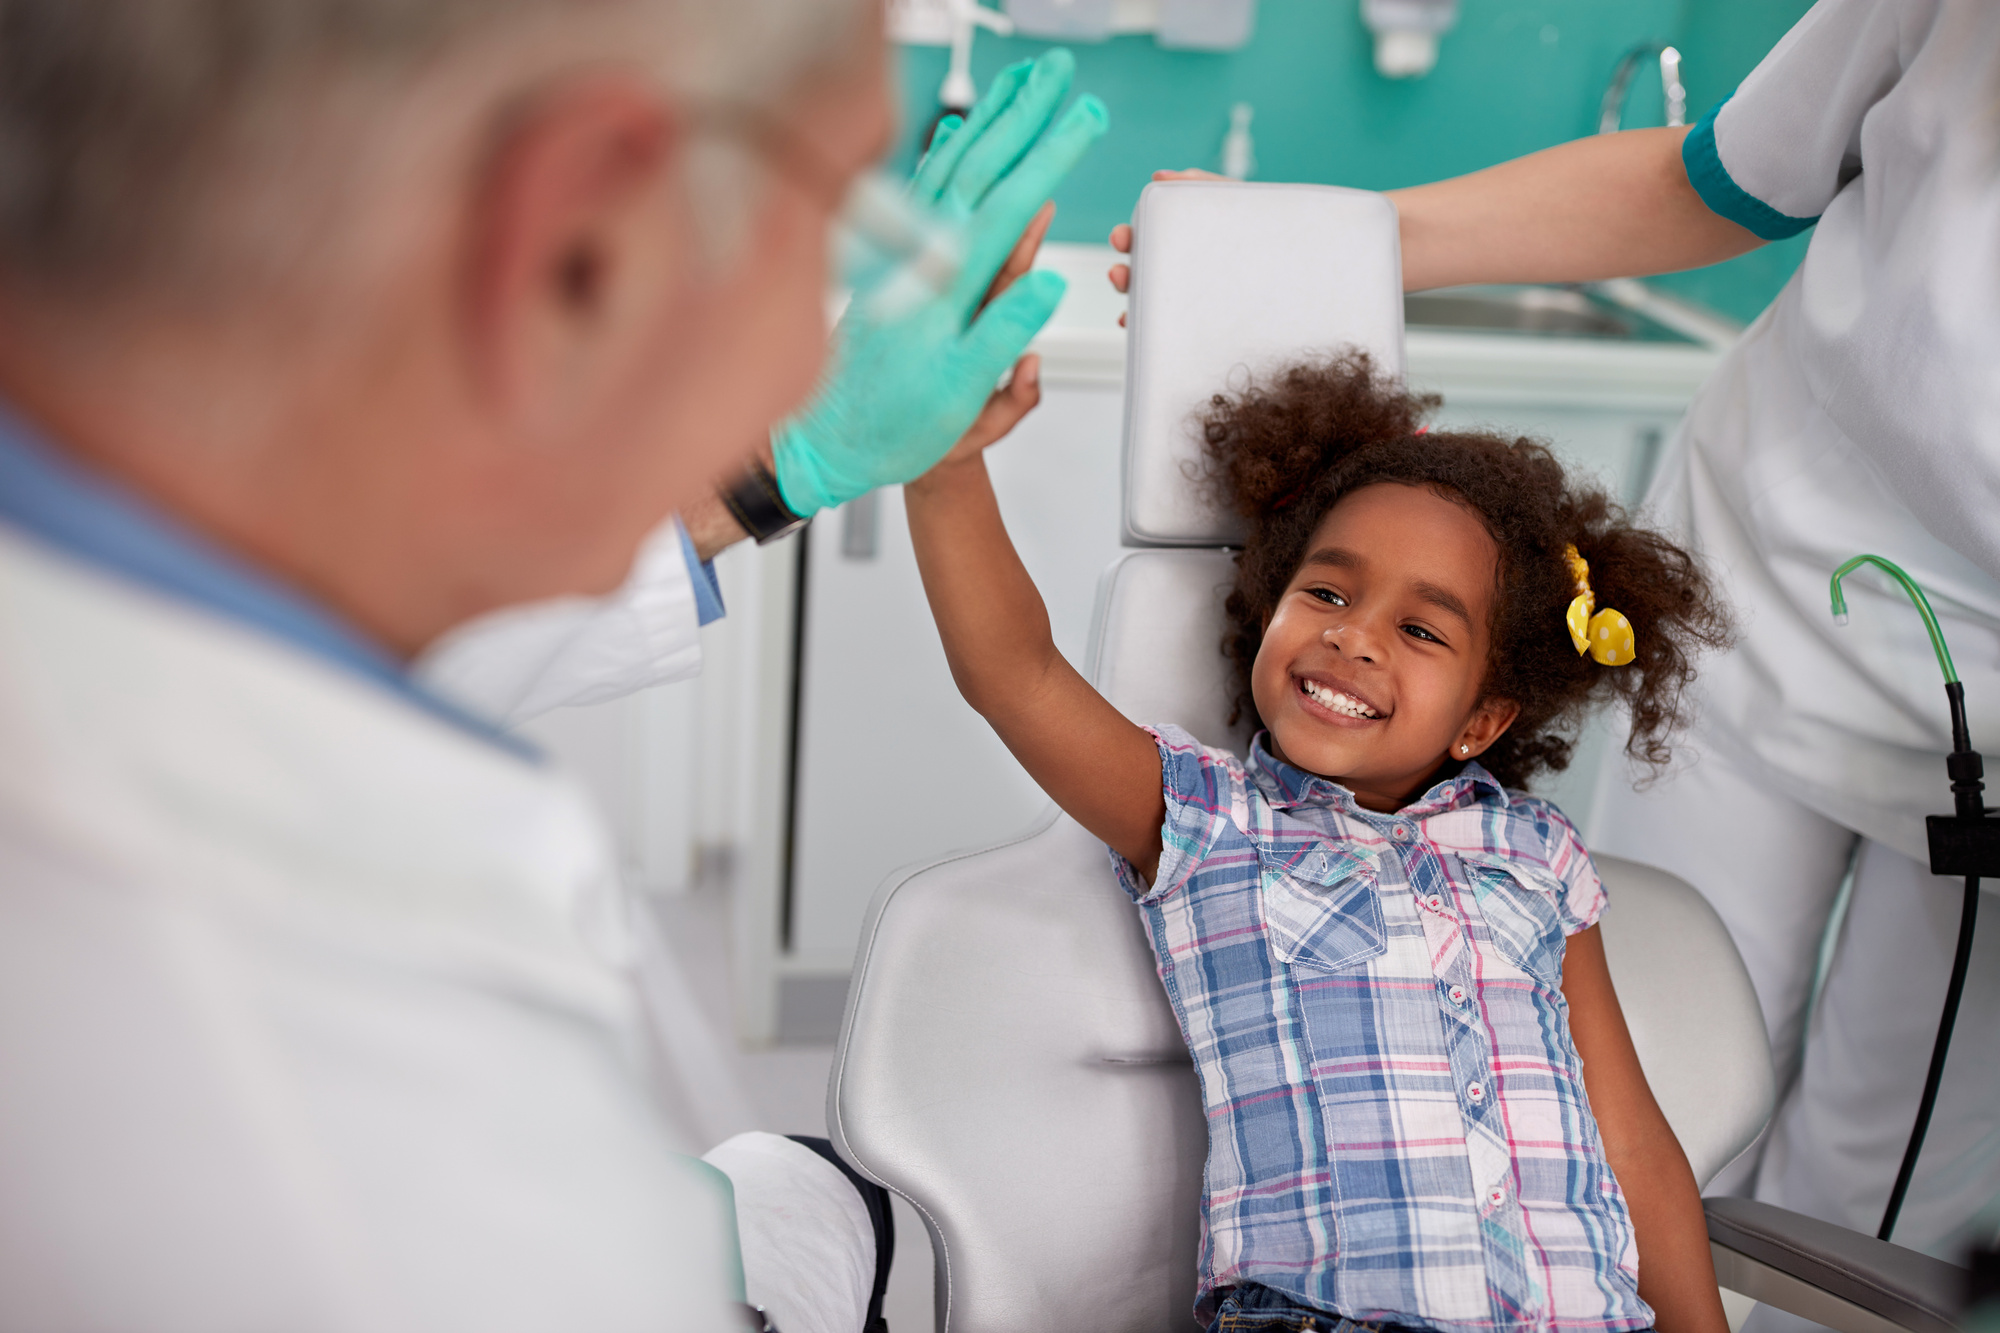 Are you looking for the right dentist for your child? Read here for five practical tips for choosing a pediatric dental practice for your child.